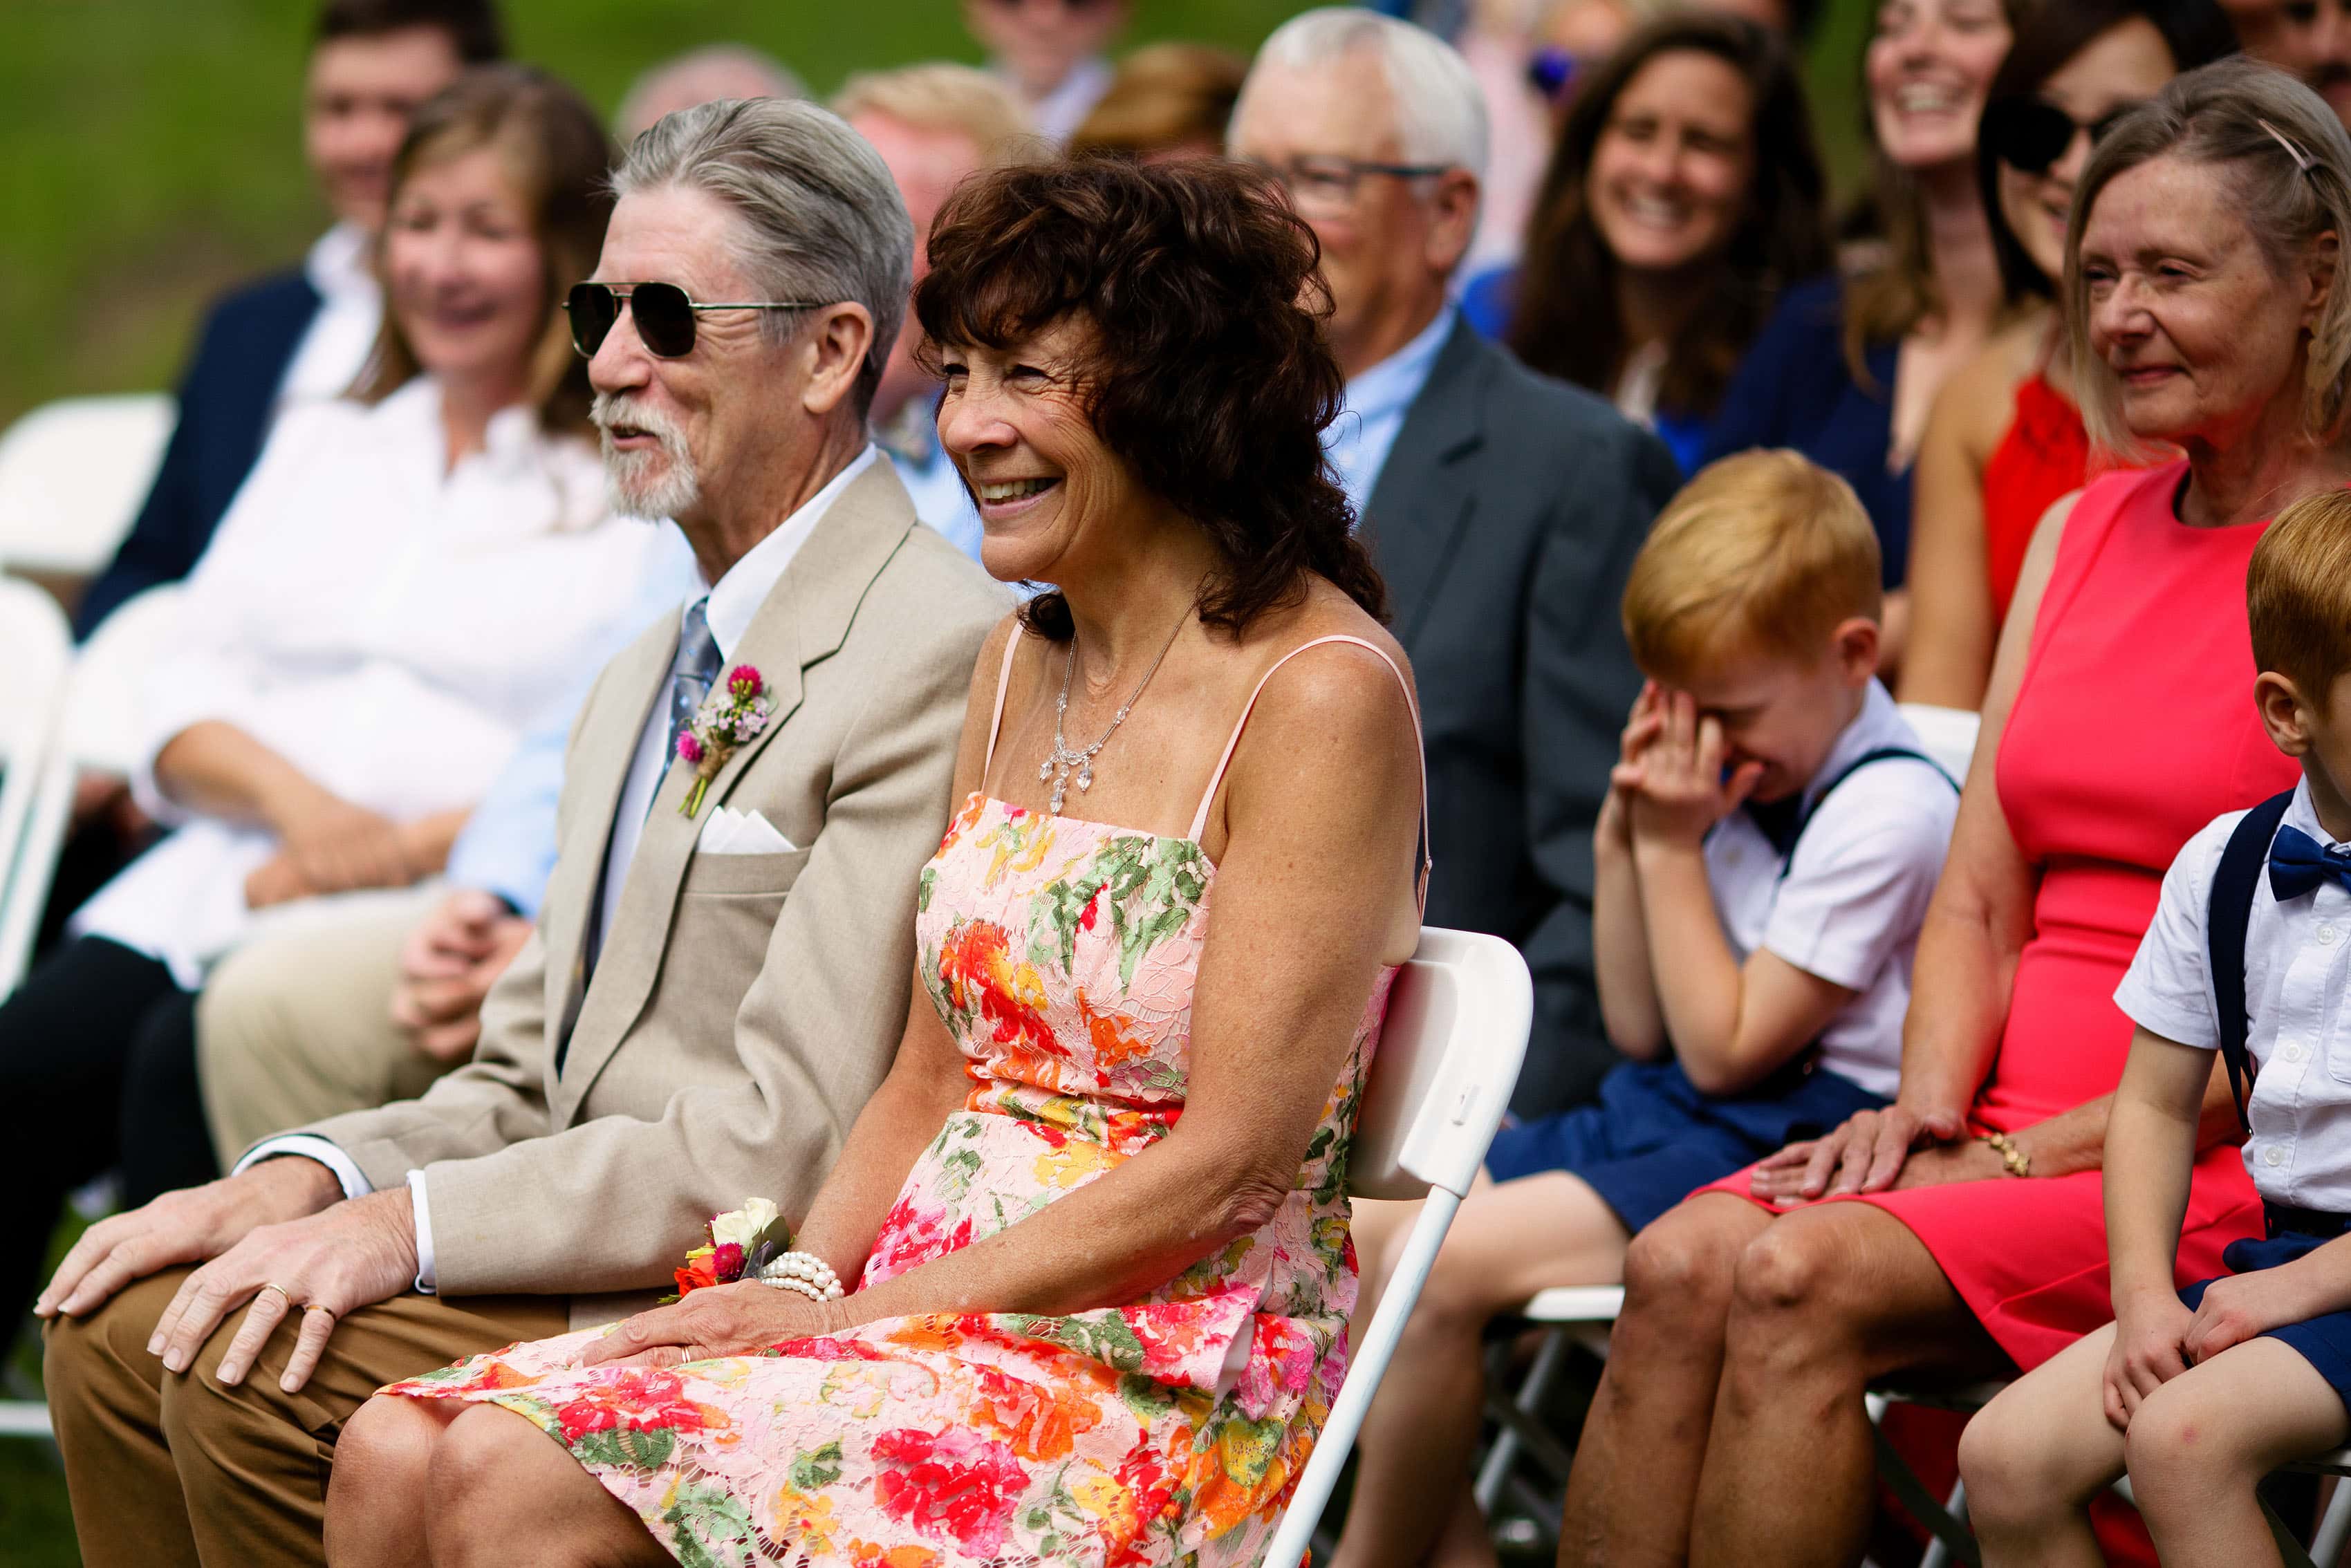 Parents laugh during the ceremony